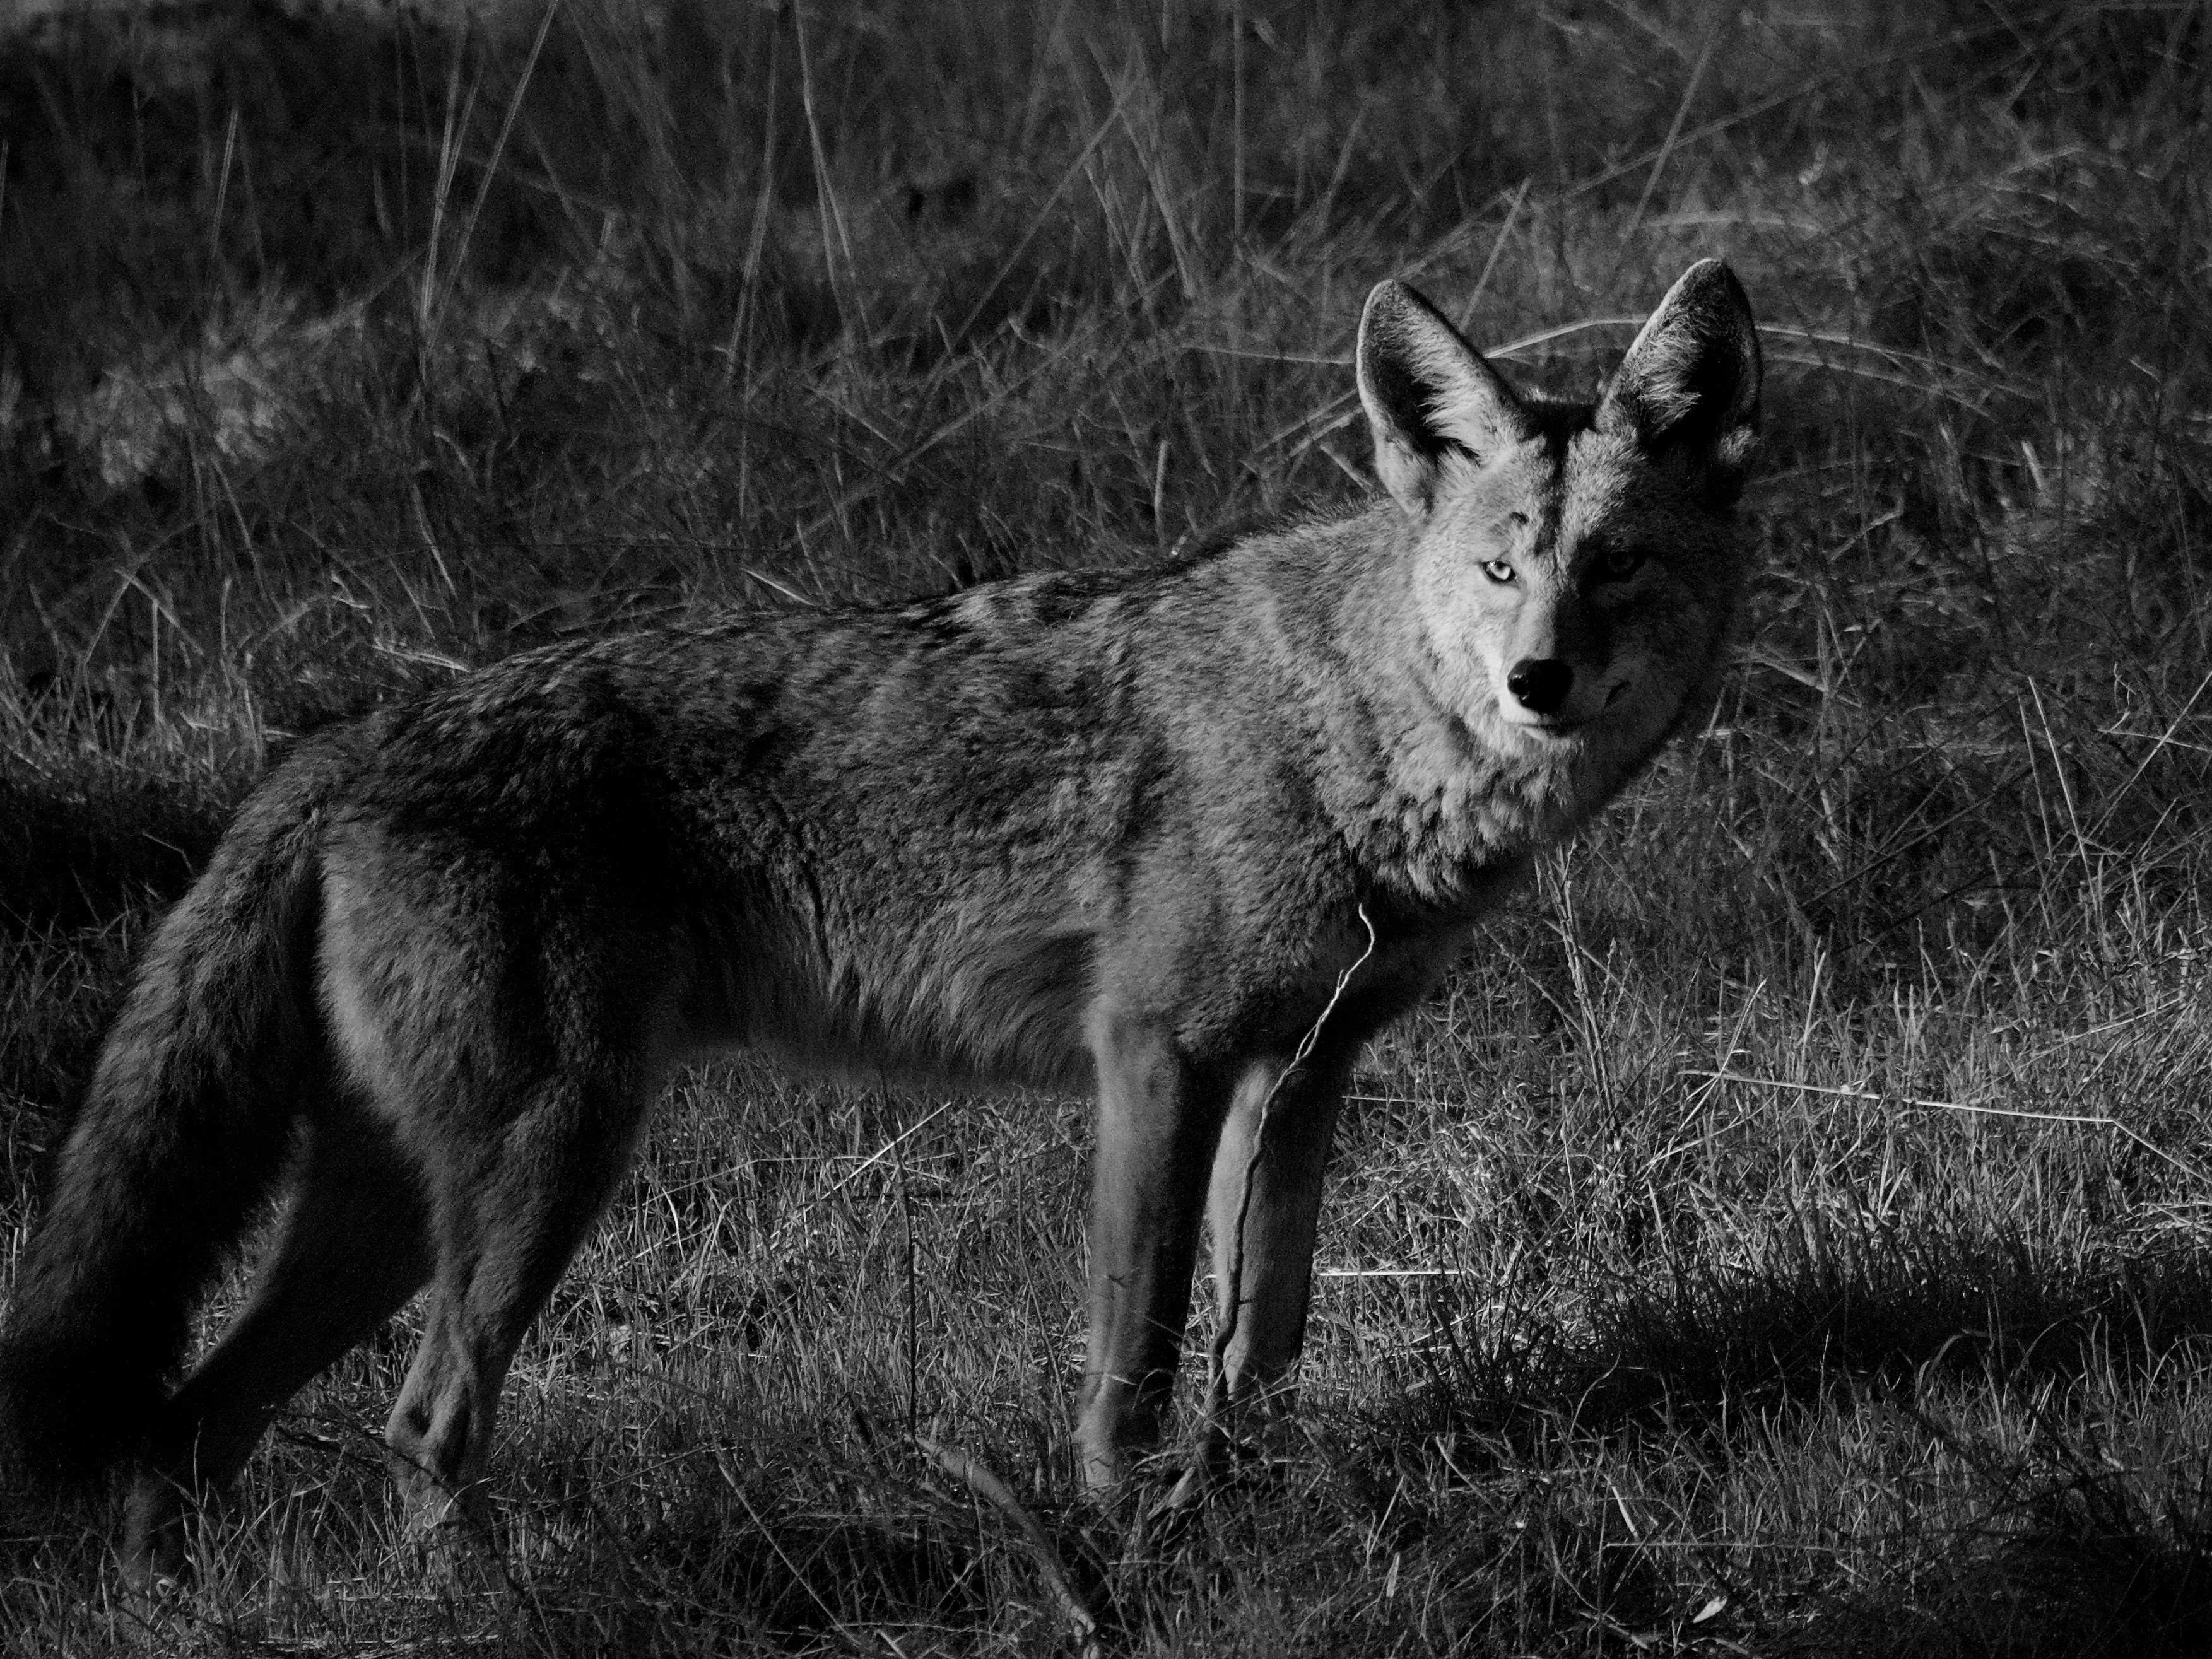 Coyote in Waning Light